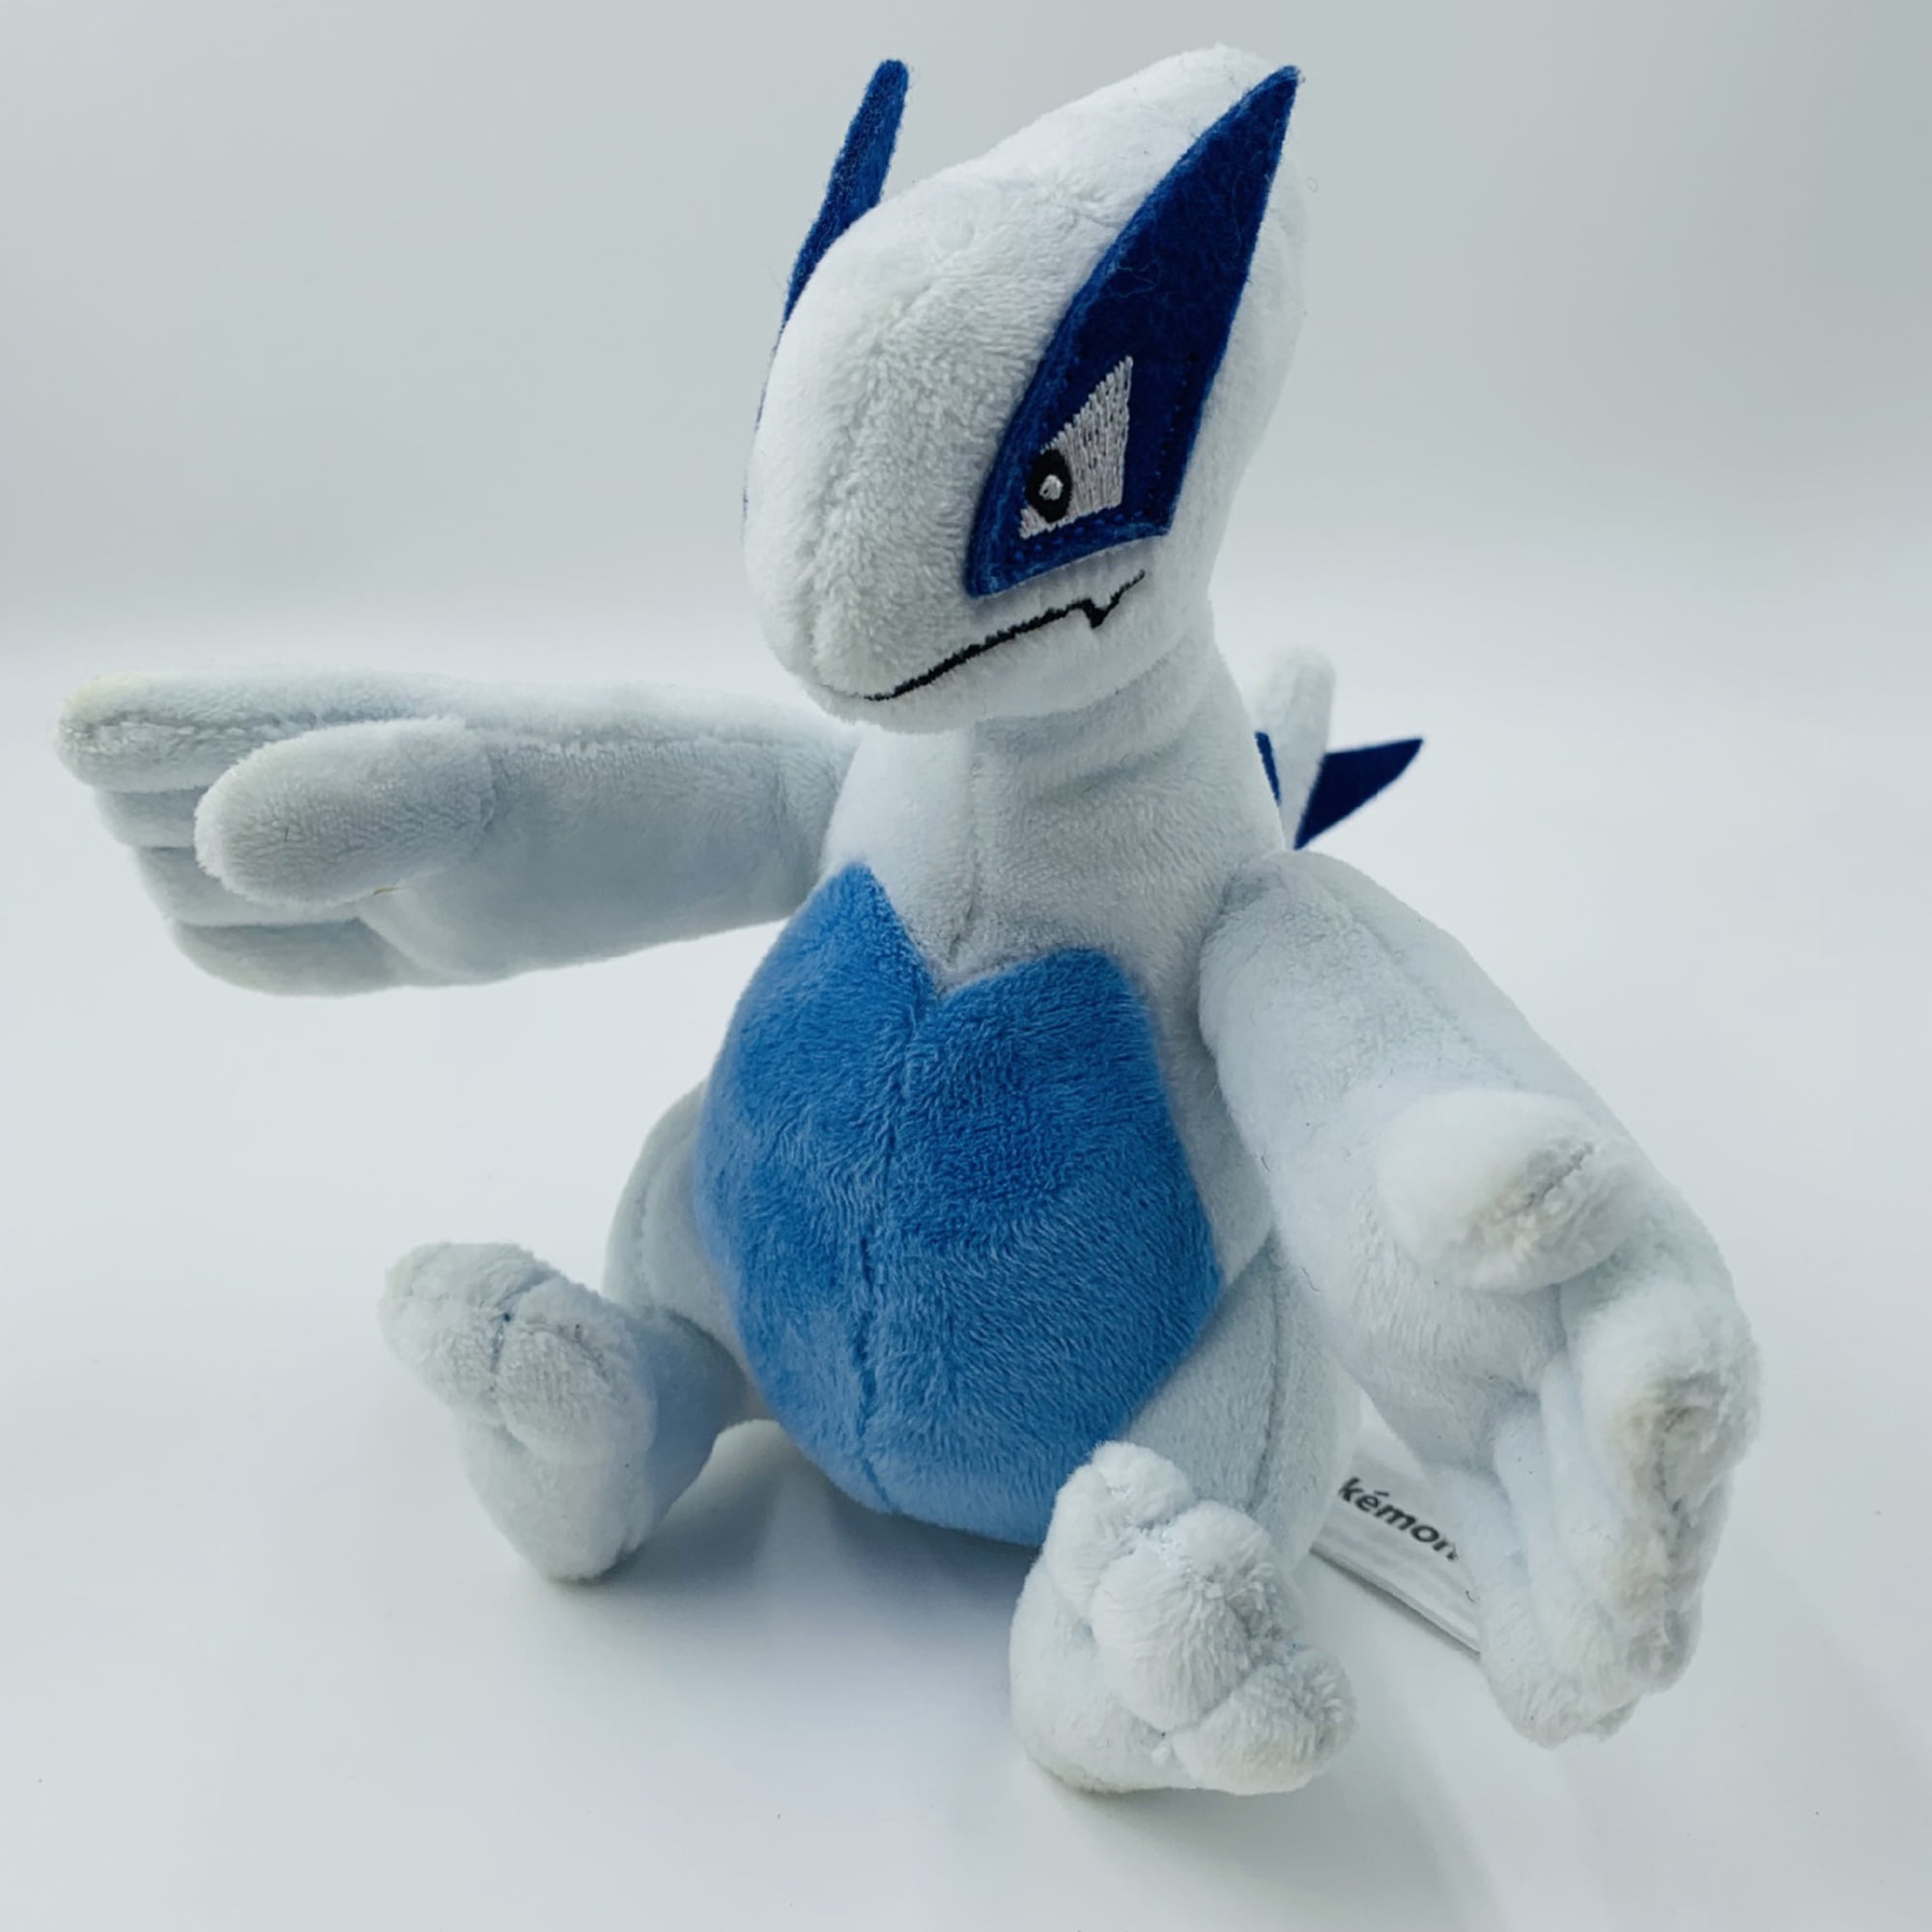 Sanei Pokemon All Star Collection Pp142 Lugia 8" Stuffed Plush Authentic USA for sale online 